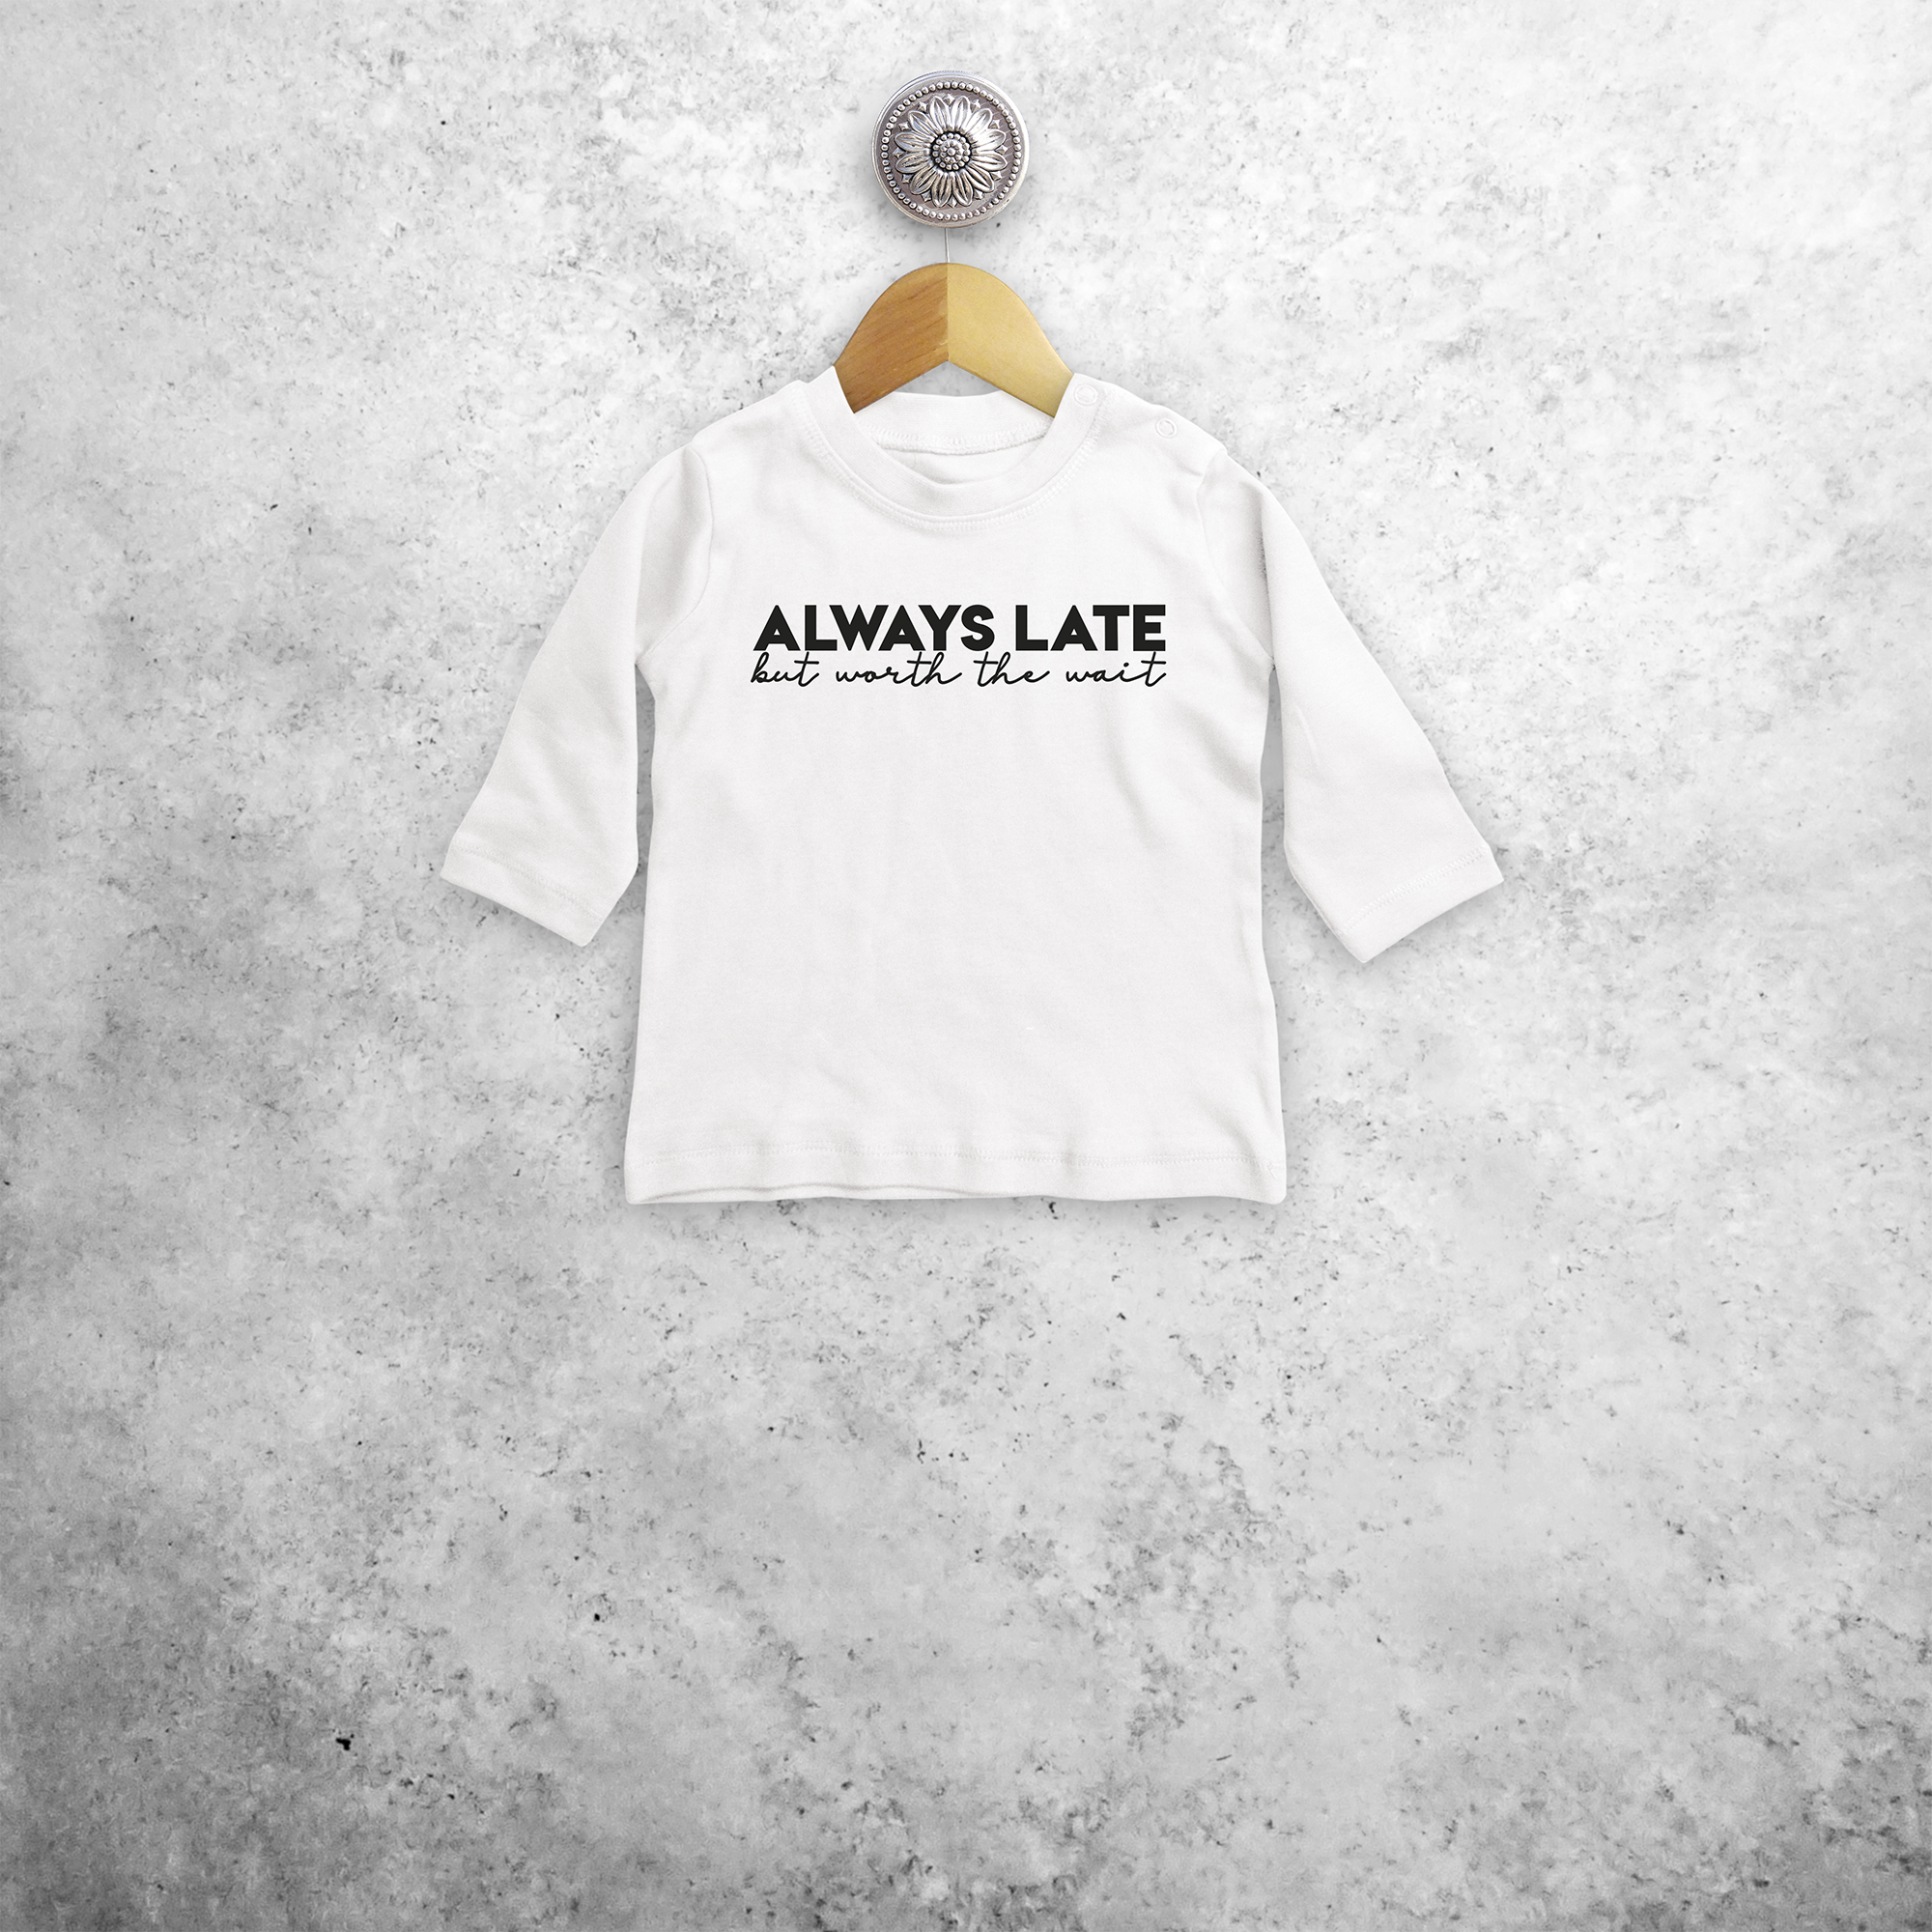 'Always late, but worth the wait' baby longsleeve shirt